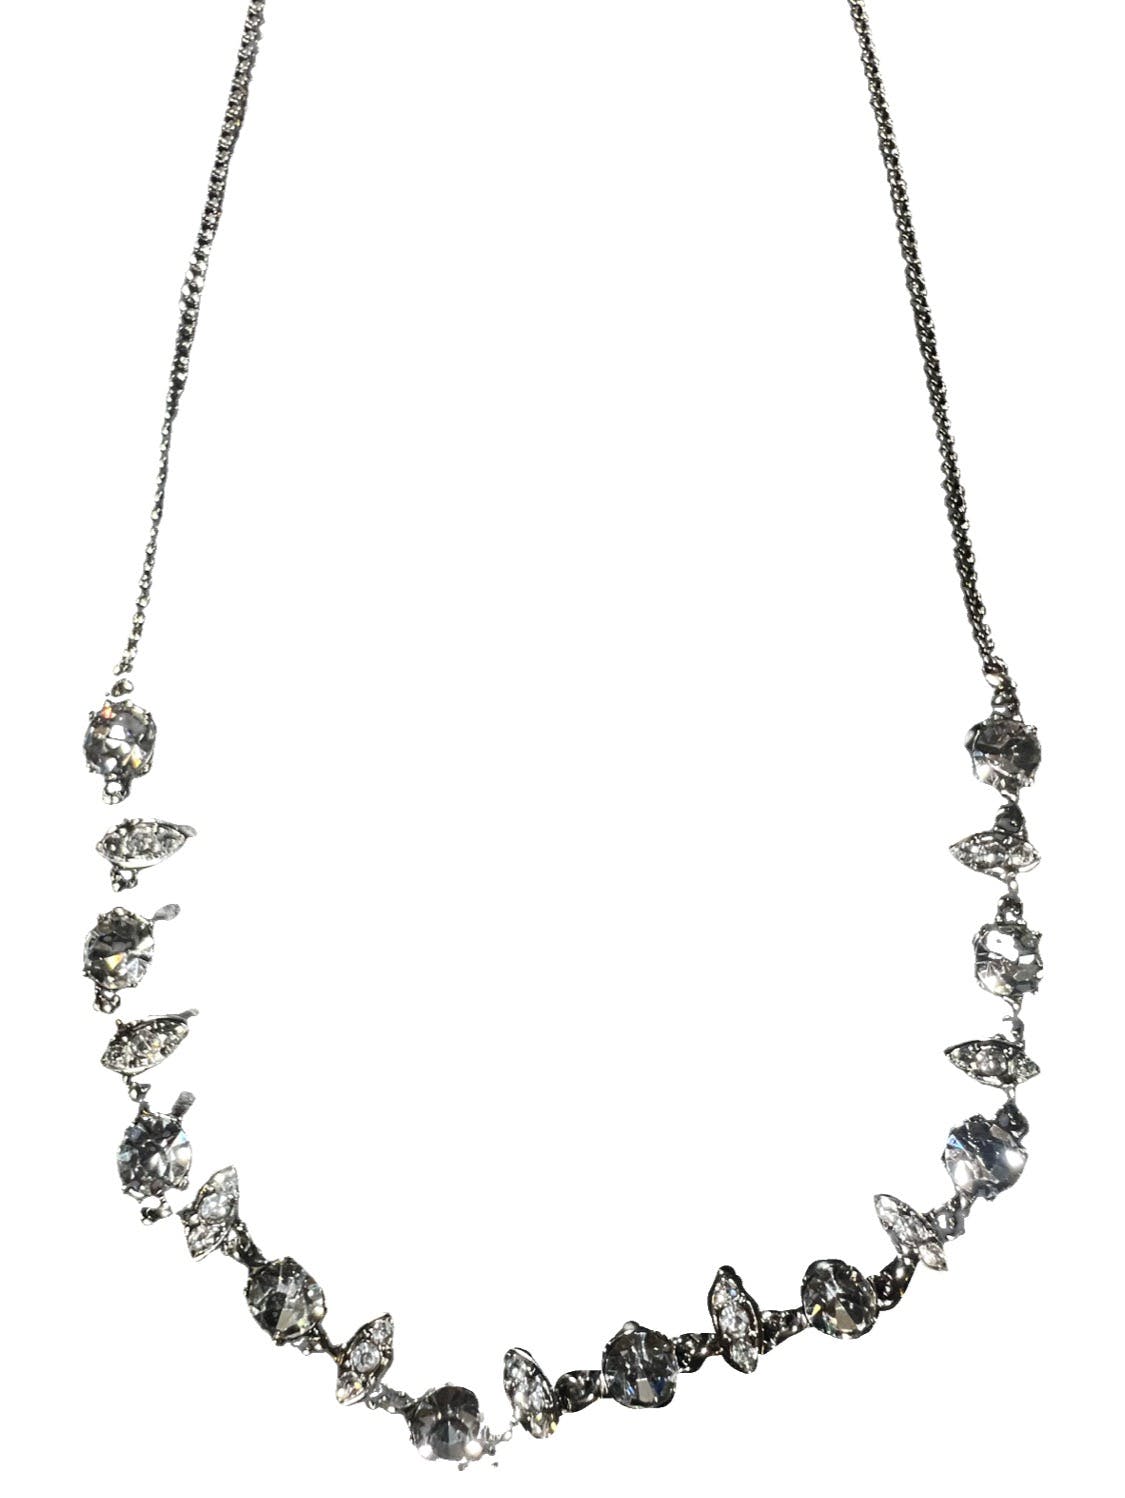 Crystal necklace - 2